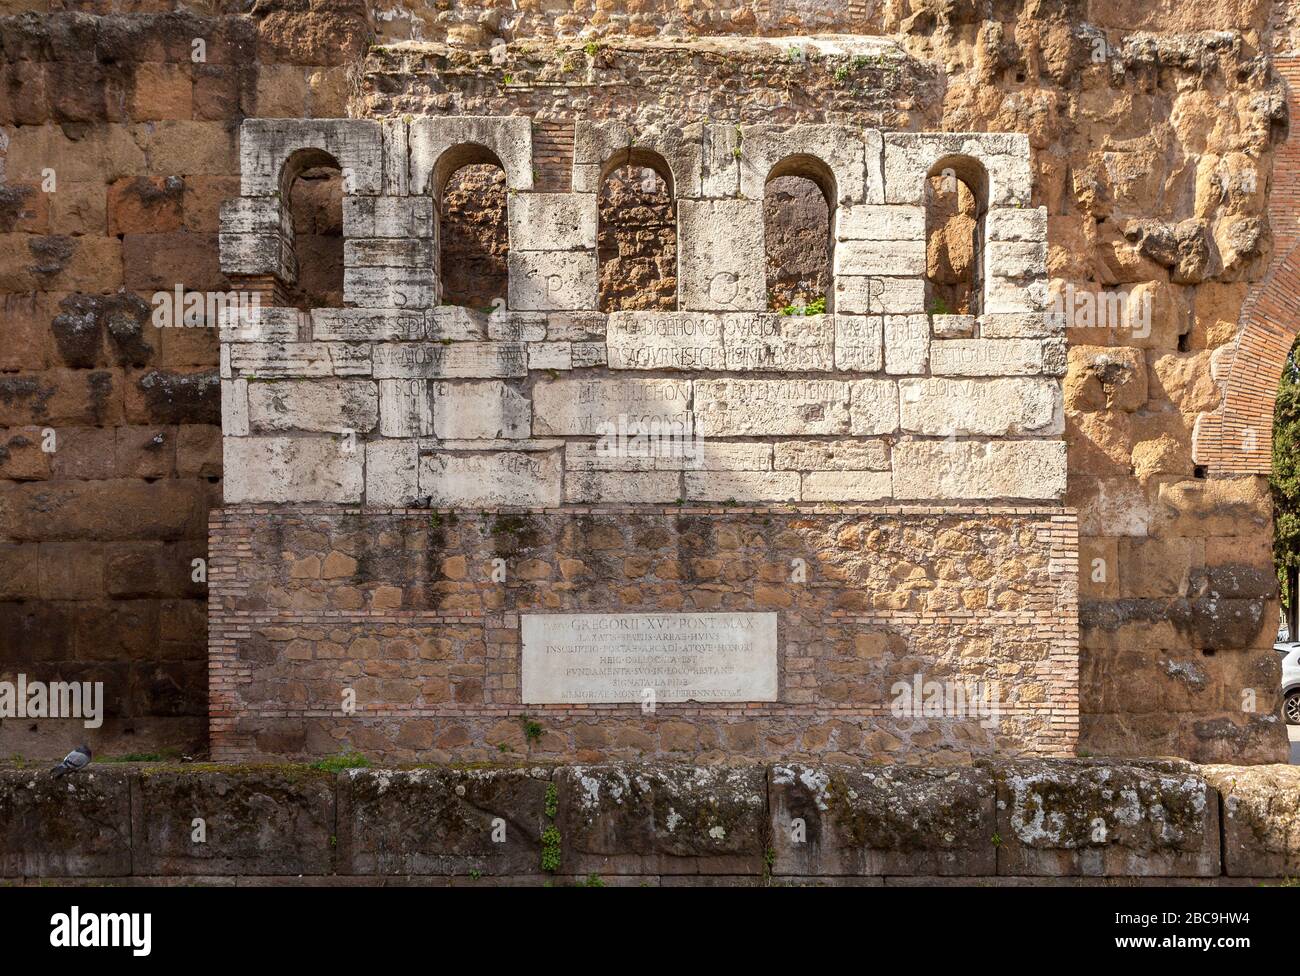 Remains of Honorius' gate near The Porta Maggiore (Larger Gate), or Porta Prenestina, is one of the eastern gates in Aurelian Walls of Rome, Italy. Stock Photo